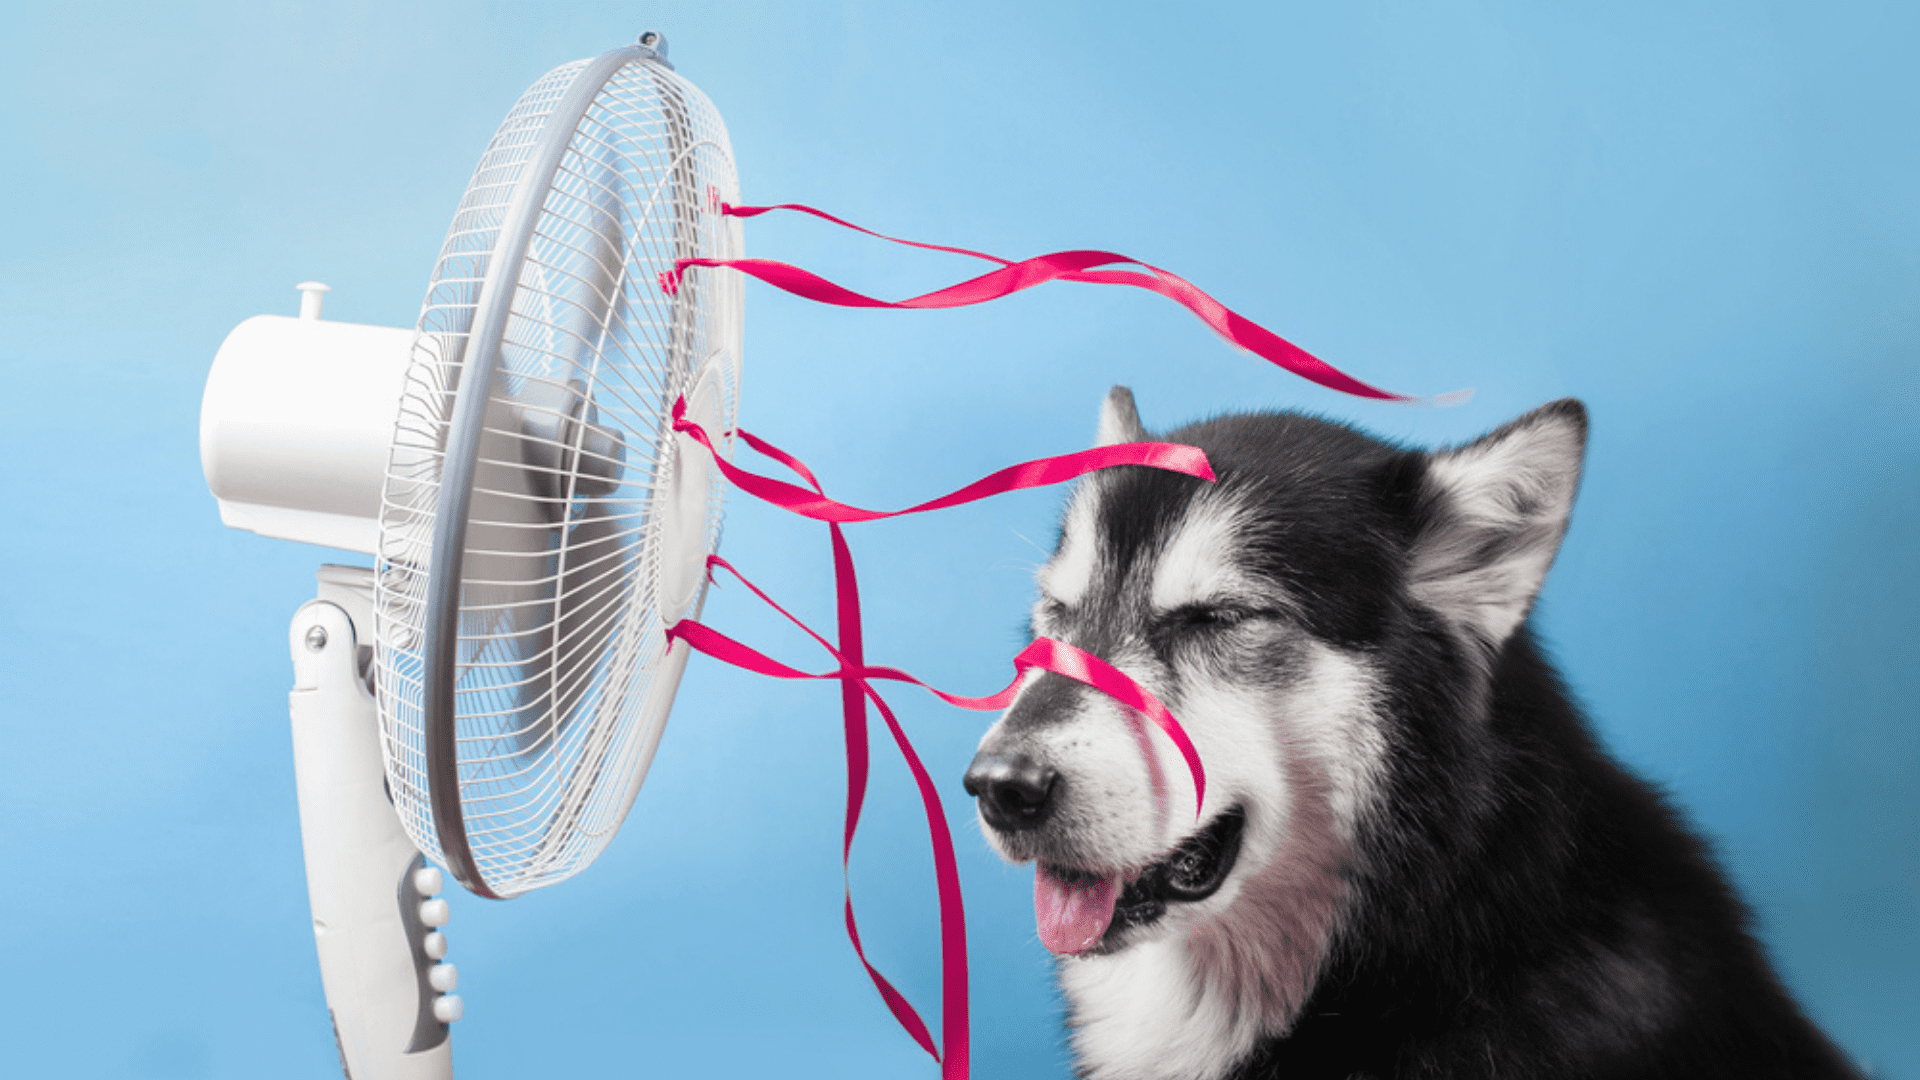 Here are some tips on how to cool your dog in the heat! (Image: Playback/Shutterstock)